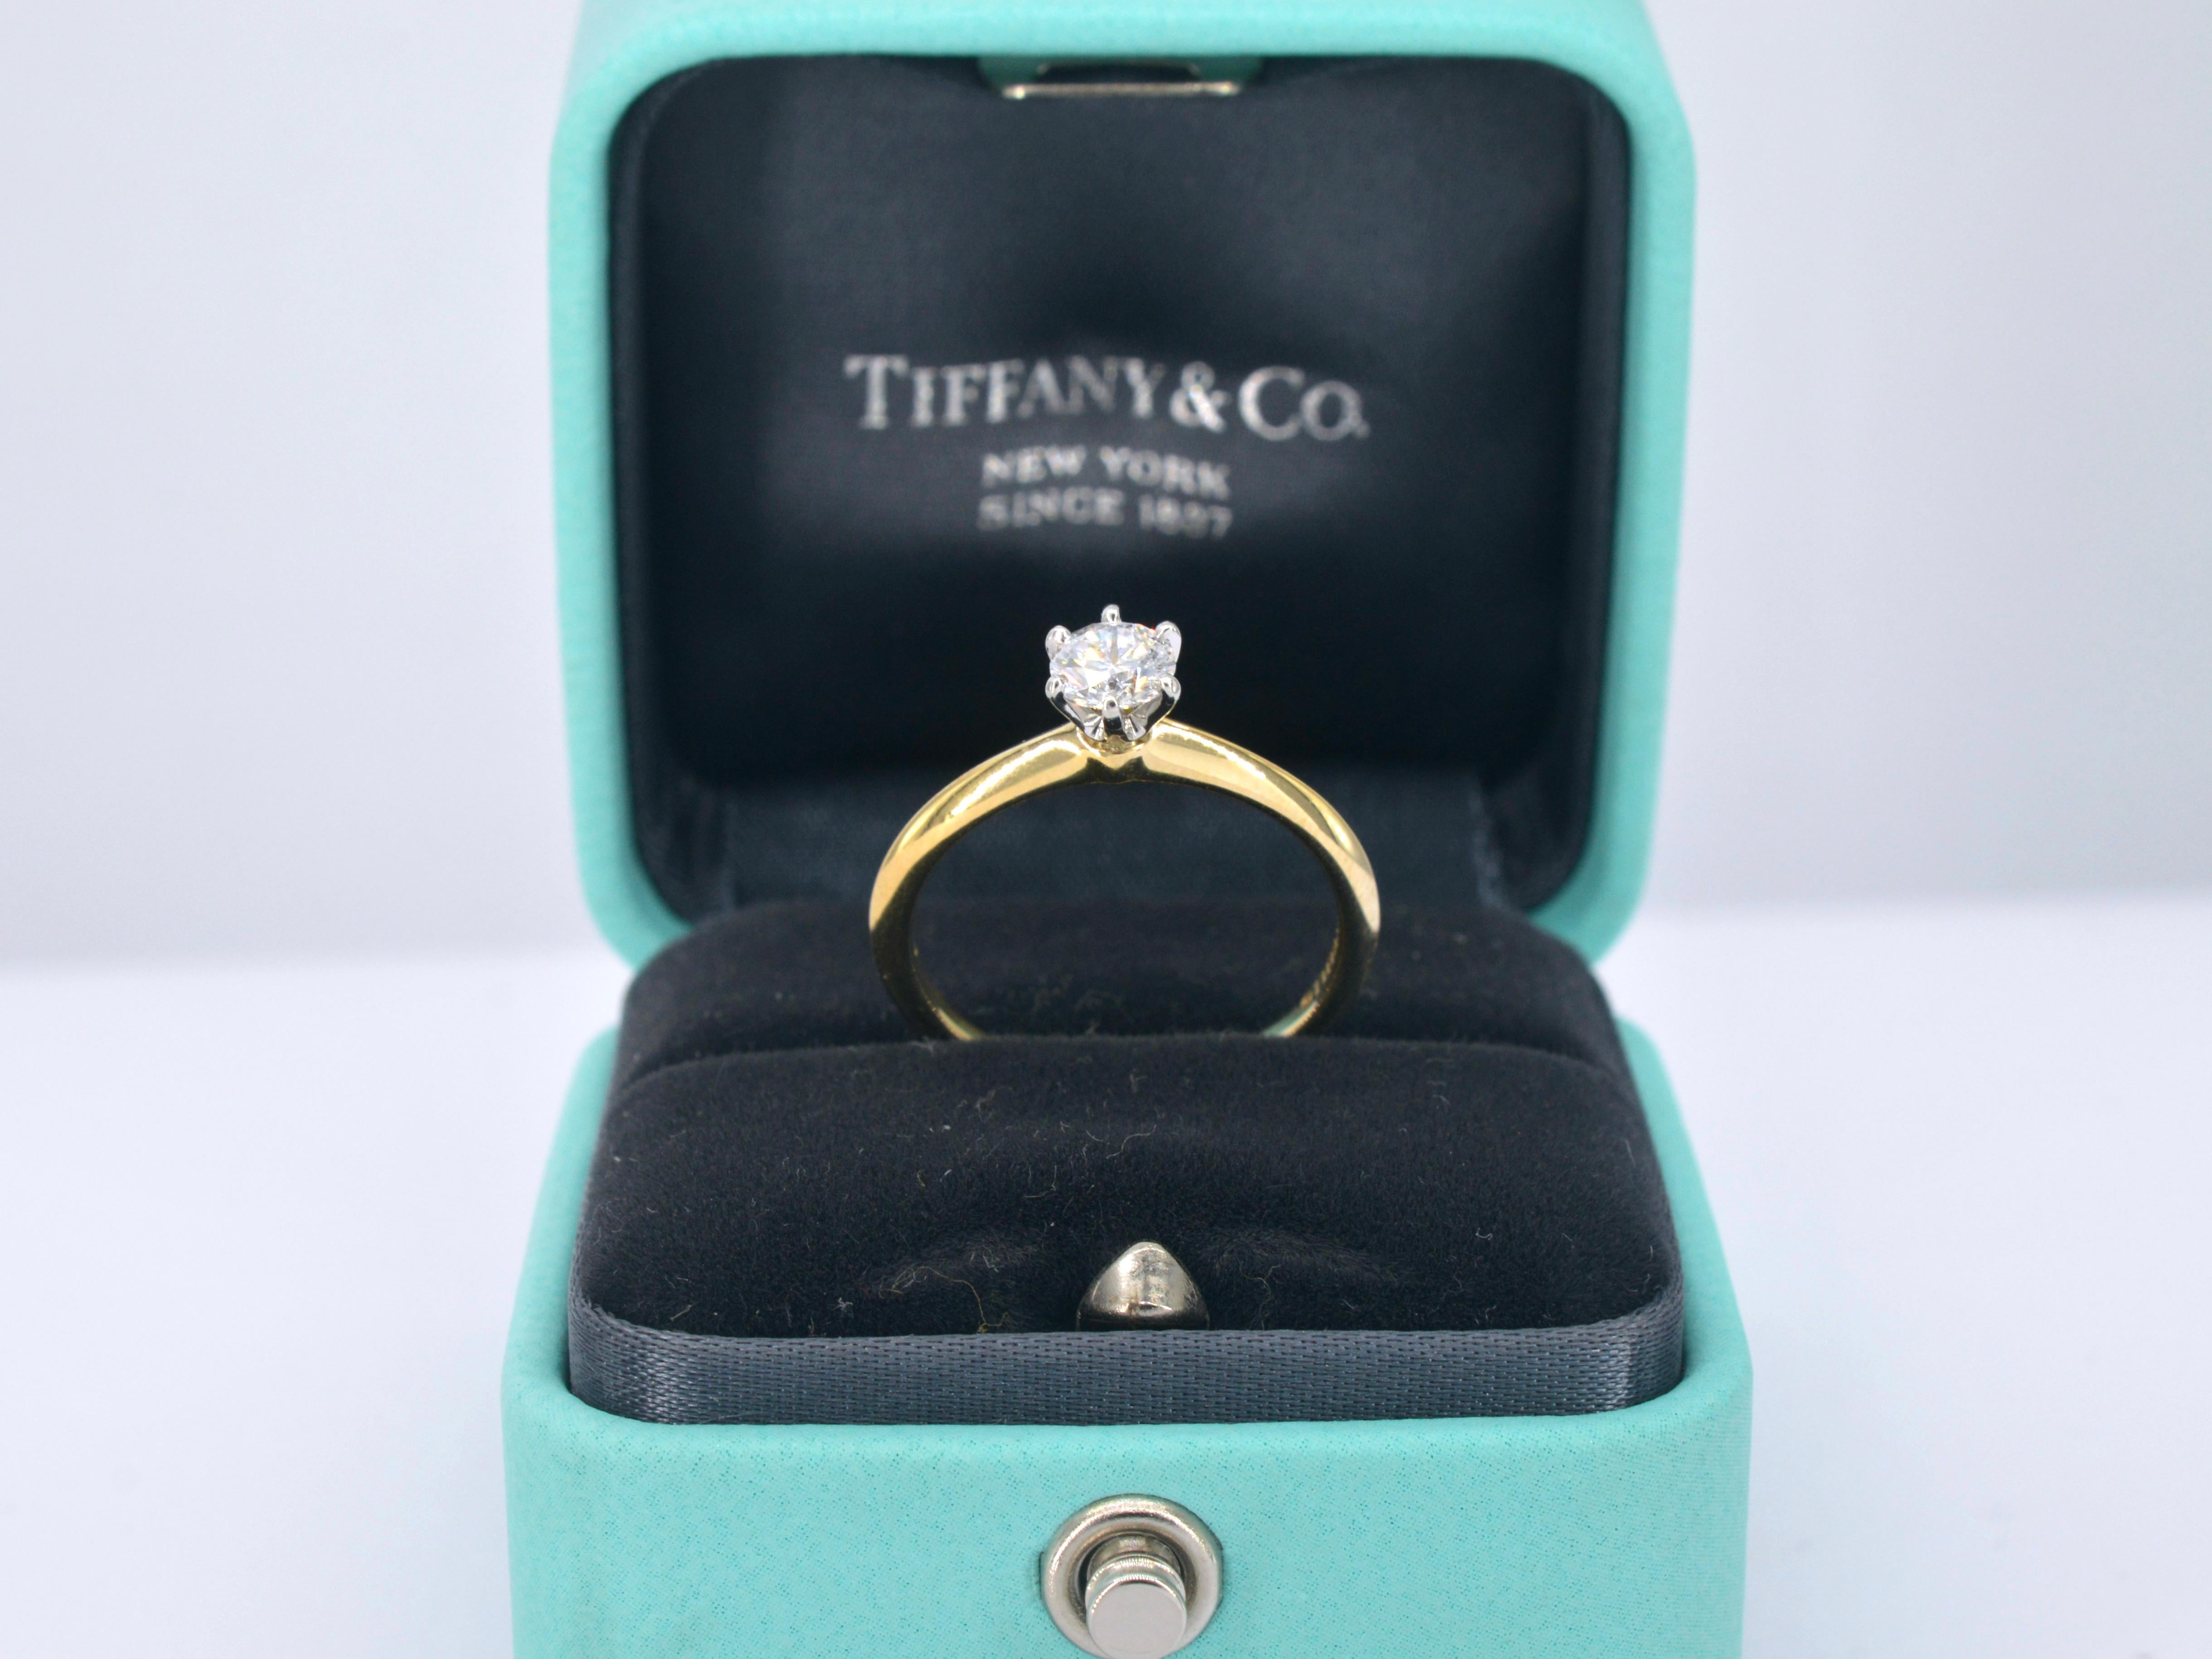 Platinum Tiffany & Co Ring with a Diamond 3